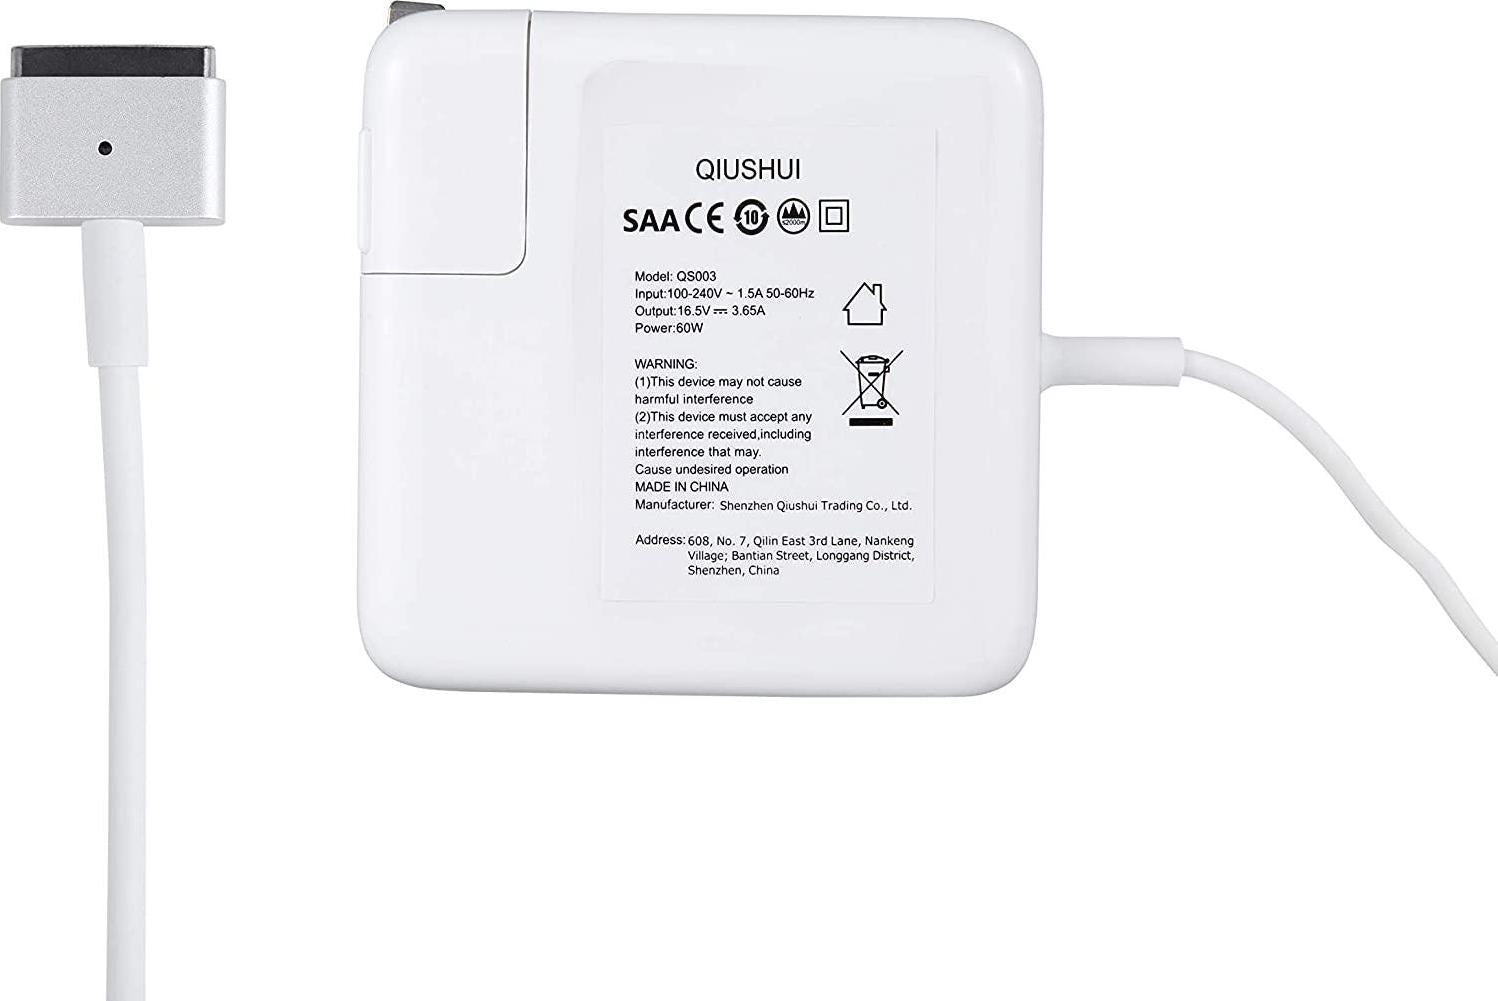 QIUSHUI, MacBook Pro Charger, Ac 60W (T-Tip) Connector Power Adapter for MacBook and 13-inch MacBook Pro (After Mid 2012 Models)